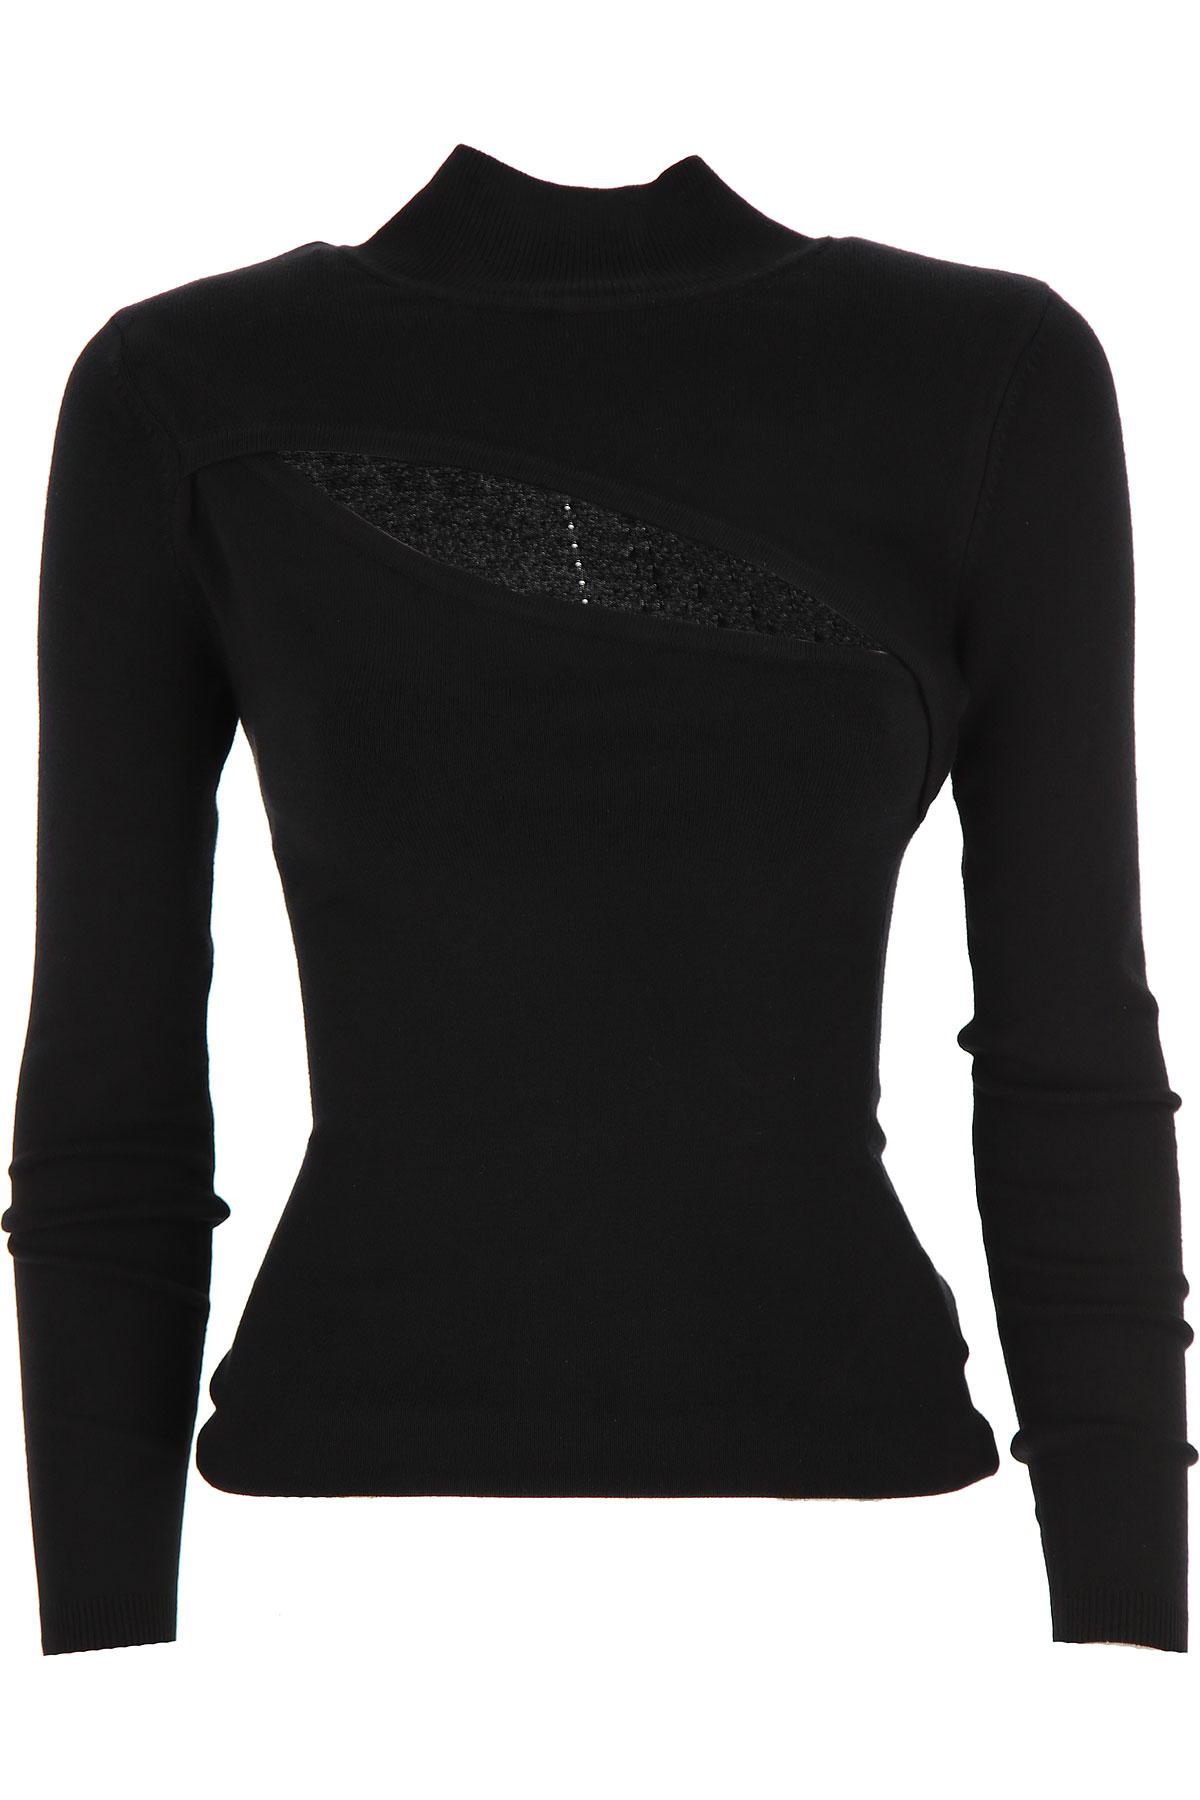 Guess Synthetic Sweater For Women Jumper in Black - Lyst